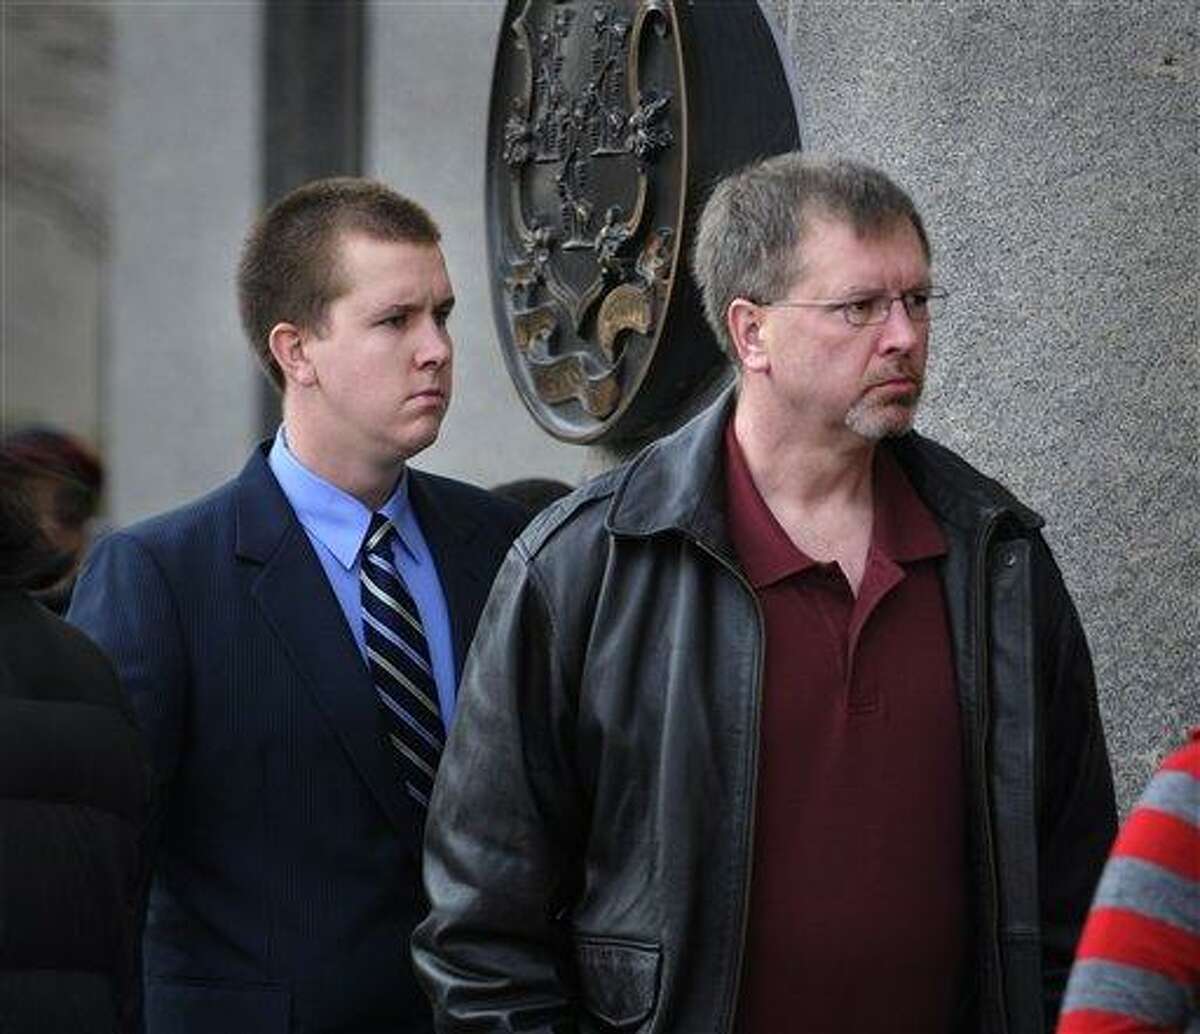 Windsor Locks police officer Michael Koistenen, left, walks into Hartford Superior Court Tuesday, Nov. 23, 2010 with his father, Windsor Locks Police Sgt. Robert Koistenen, for his arraignment hearing. Michael Koistenen pleaded not guilty to manslaughter charges in the death of a 15-year-old boy who was riding his bike home from a friend's house when police say he was hit by a speeding car. (AP Photo/The Hartford Courant, Stephen Dunn)